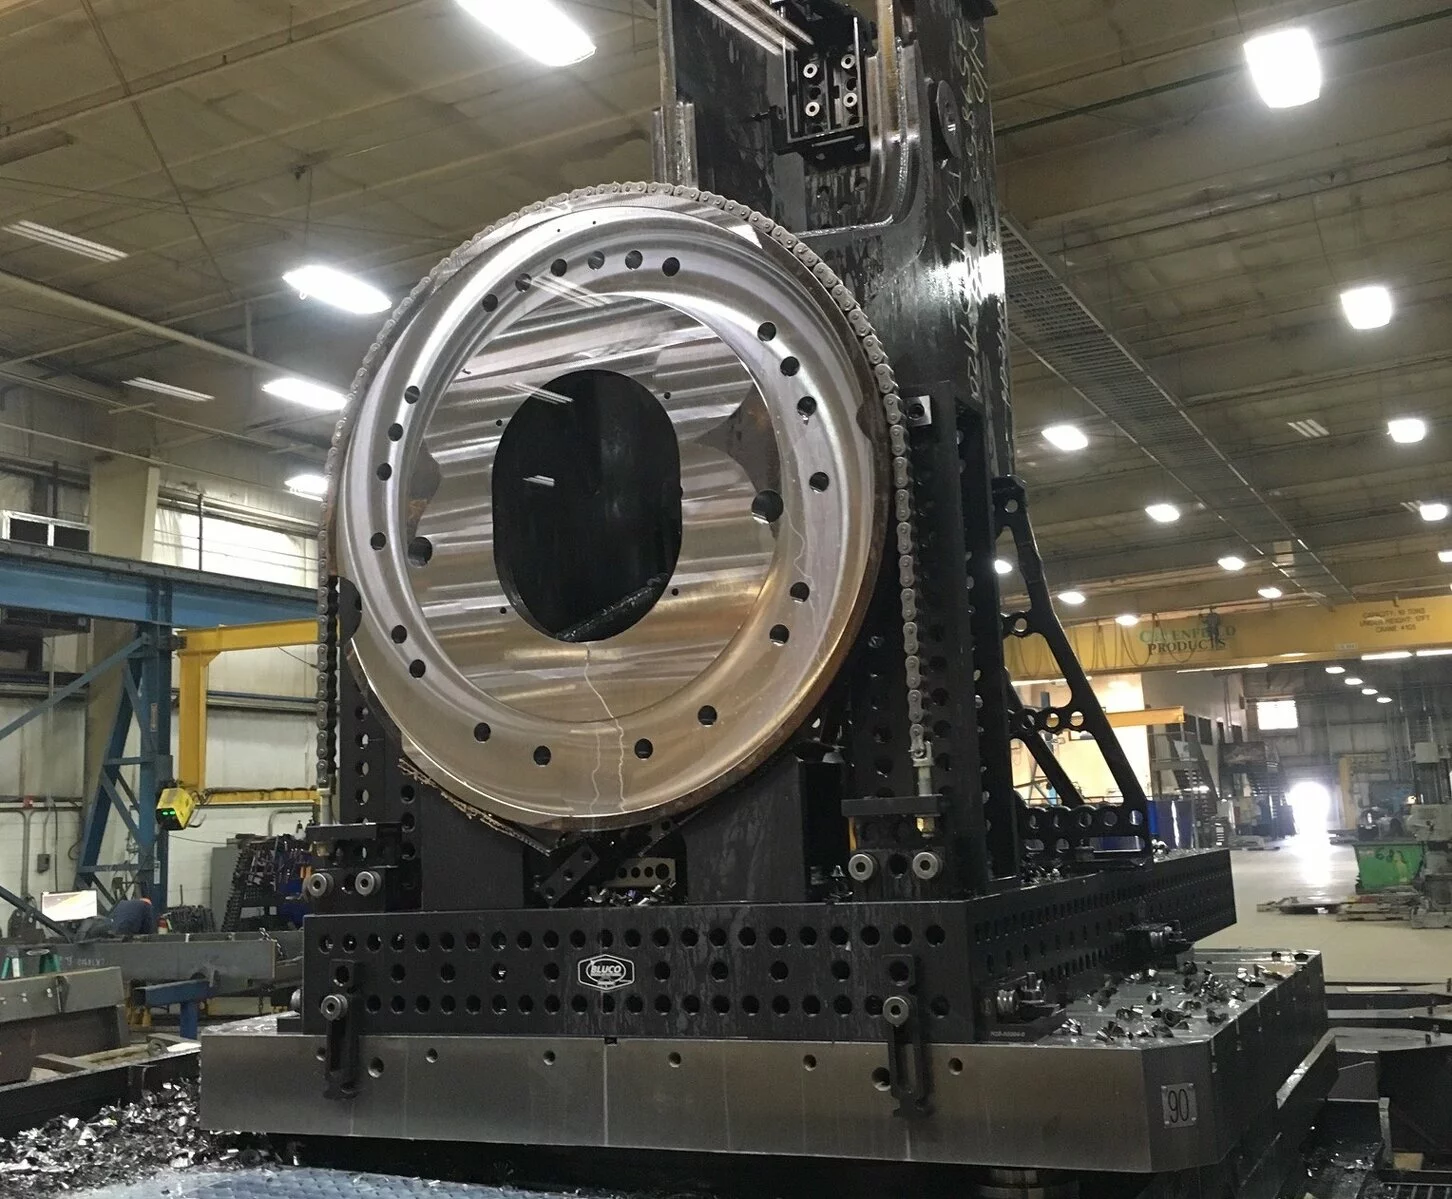 Large Turntable for mobile crane. Machining fixture built from D28 and Bluco machining components. Machine is a large HMC 2022/05/bluco-3-material-handling-18446-11.jpg 